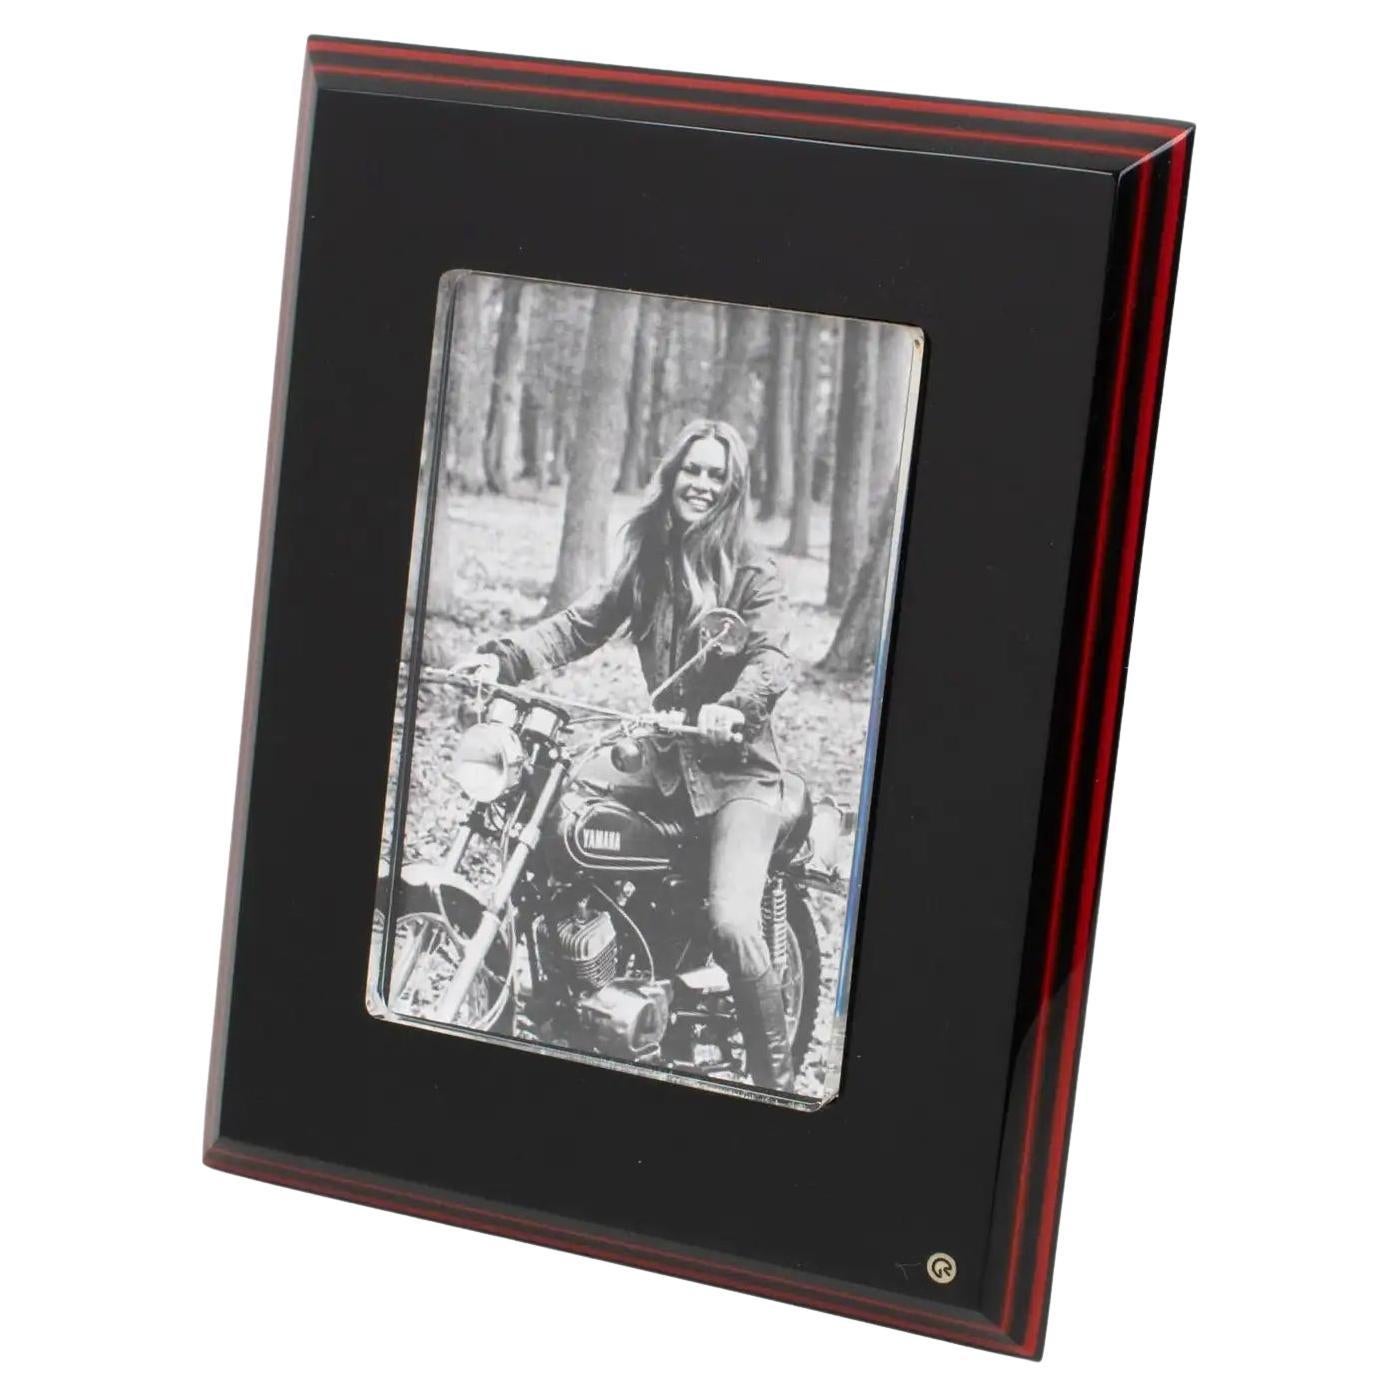 Rede Guzzini Black and Red Lucite Picture Frame, Italy 1970s